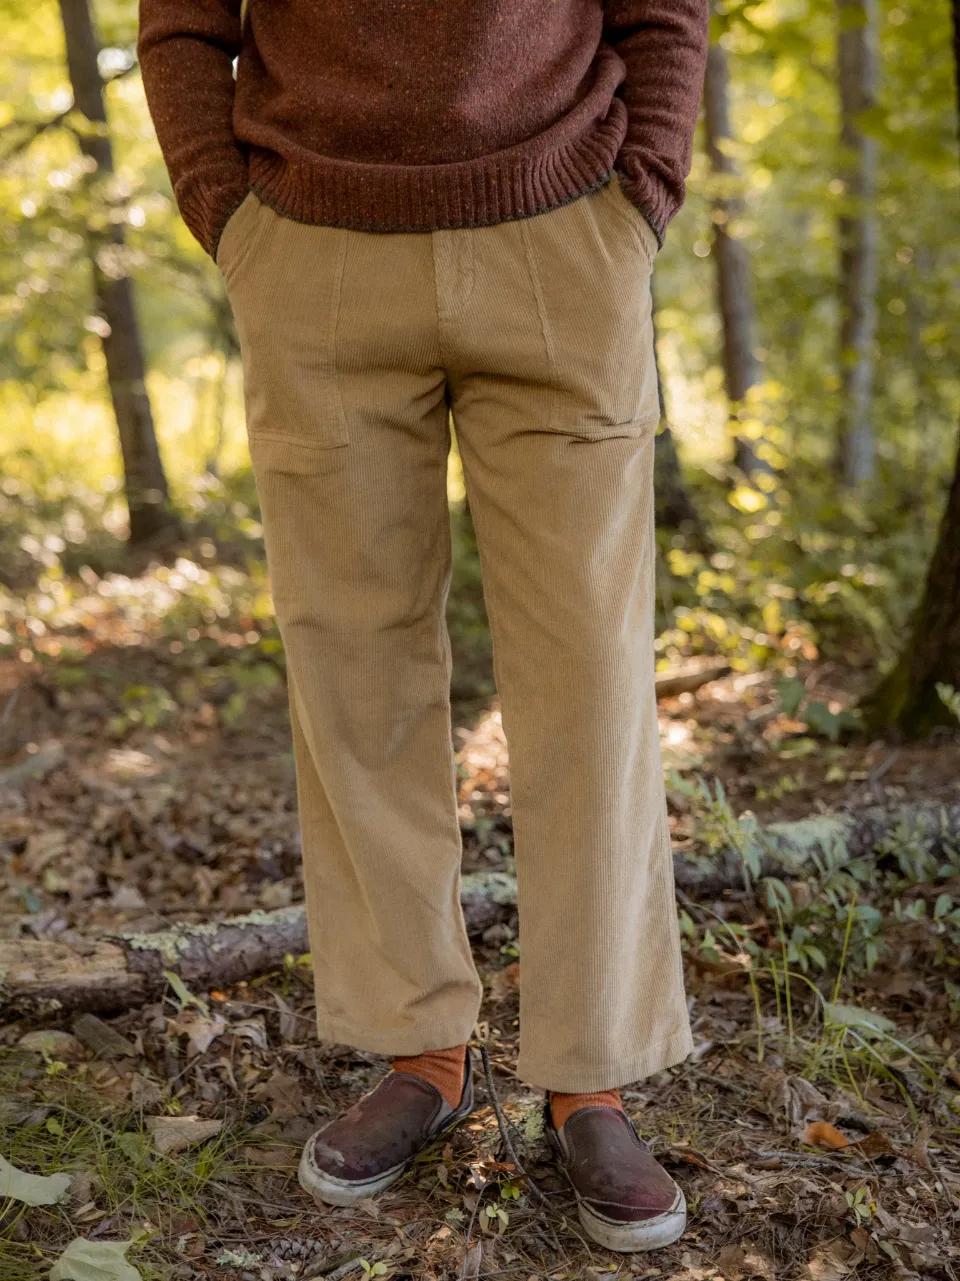 Are Corduroy Pants Business Casual